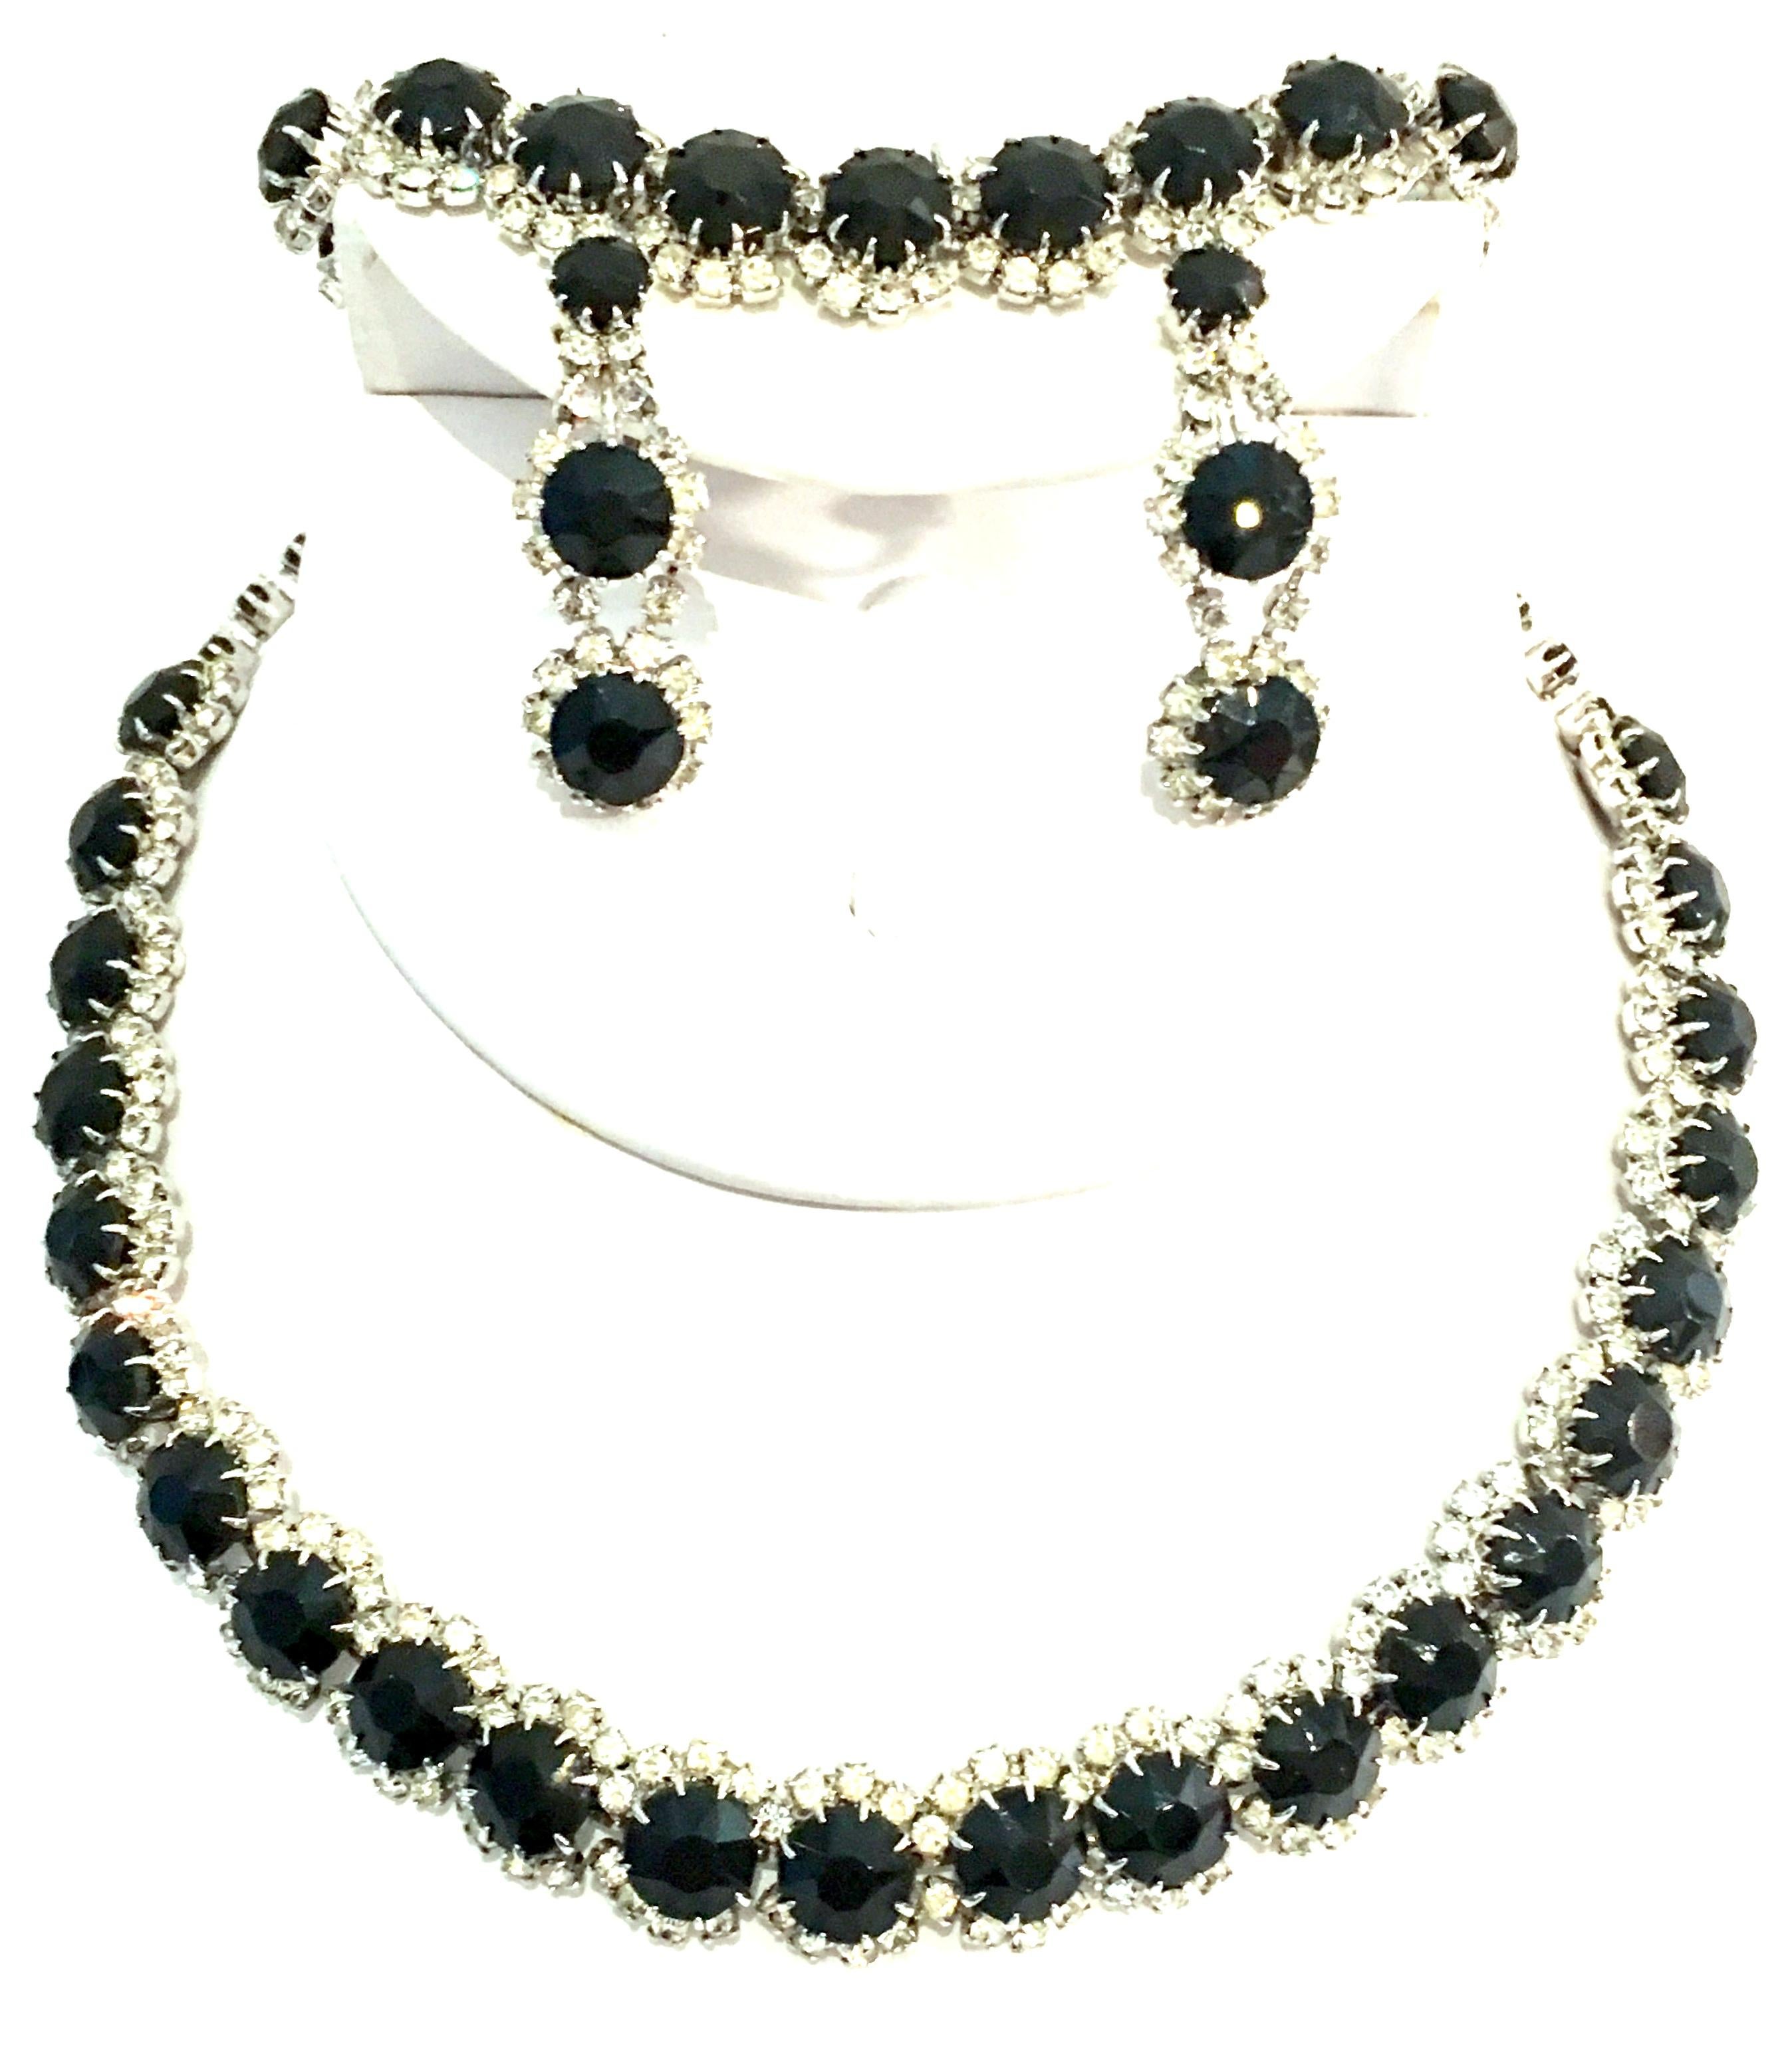 20th Century Silver & Austrian Crystal Necklace, Bracelet And Pair Of Earrings, Set Of Four Pieces By Kramer Of New York. This finely crafted demi-parure set of four pieces features silver rhodium plate fancy prong set brilliant cut and faceted